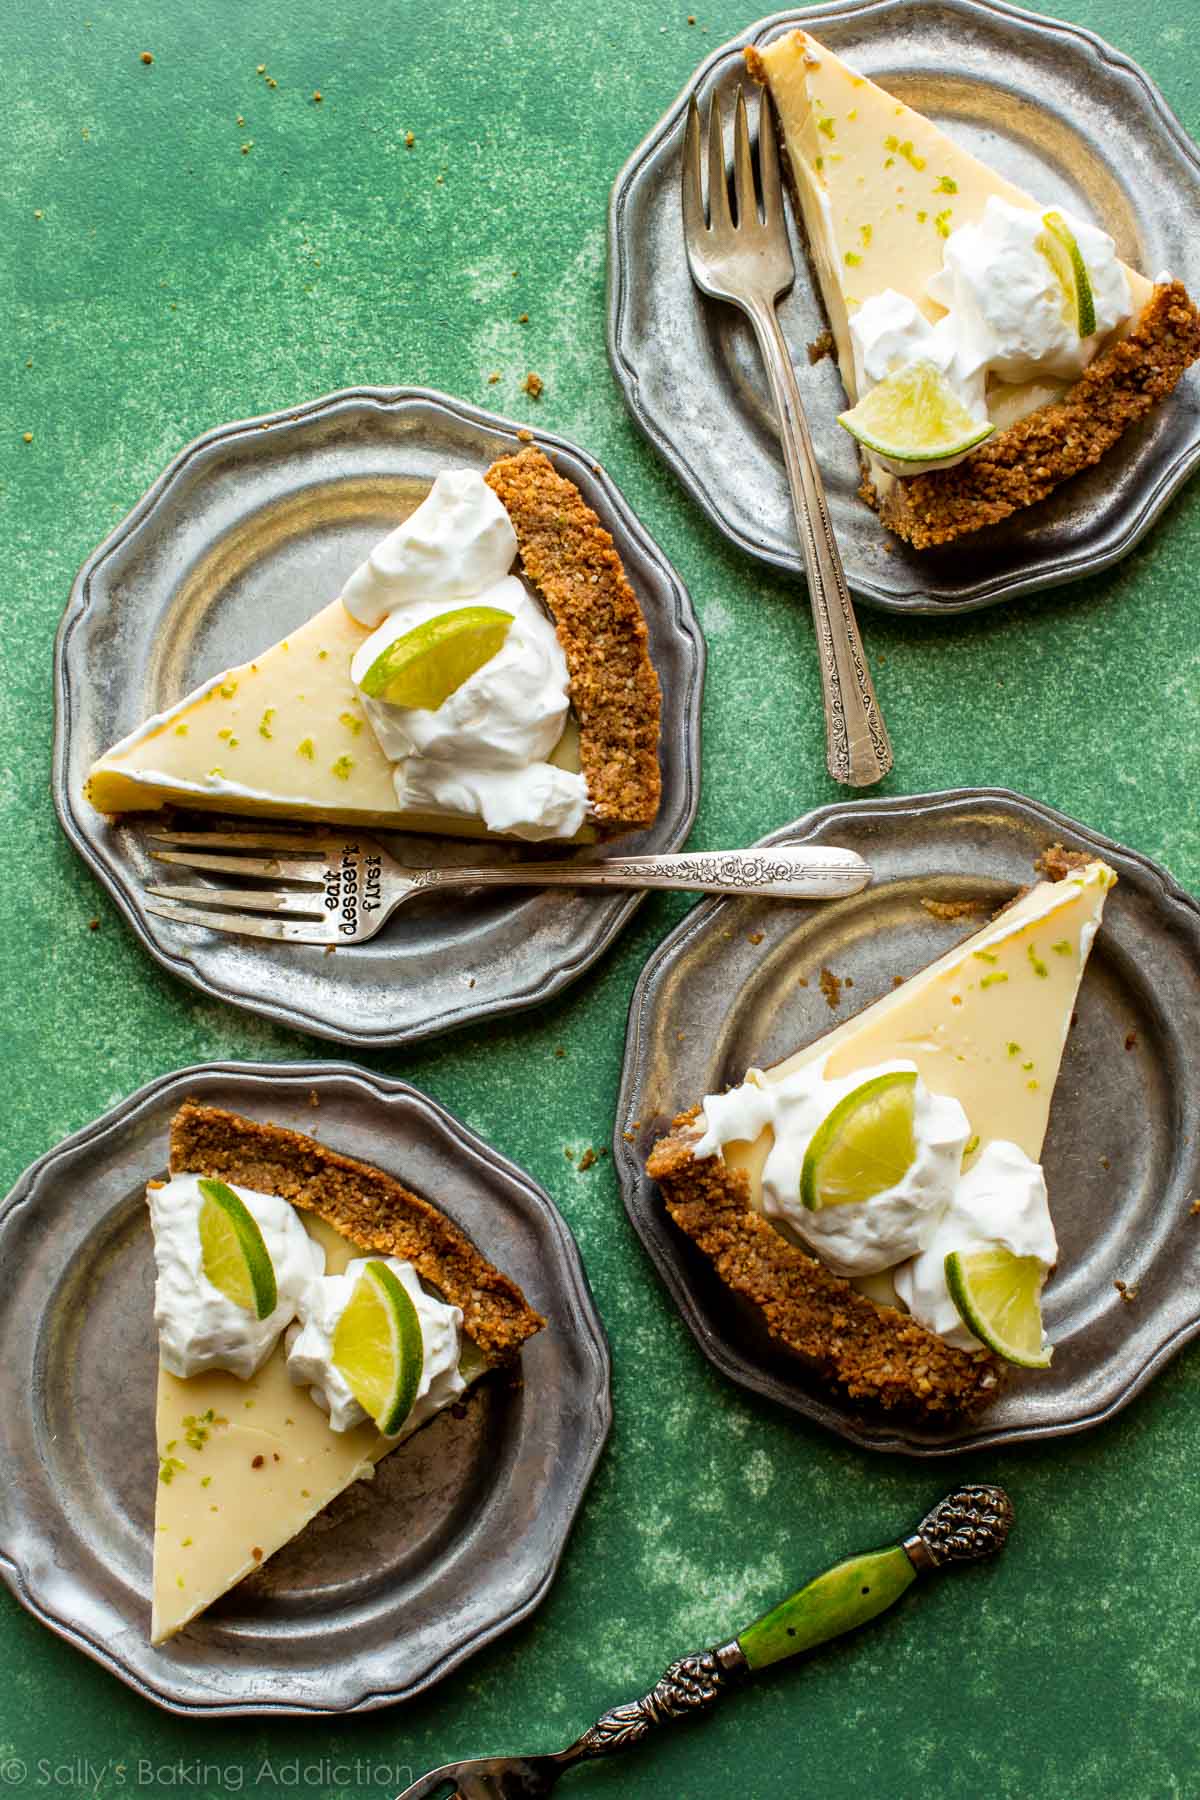 slices of key lime pie on silver plates with forks